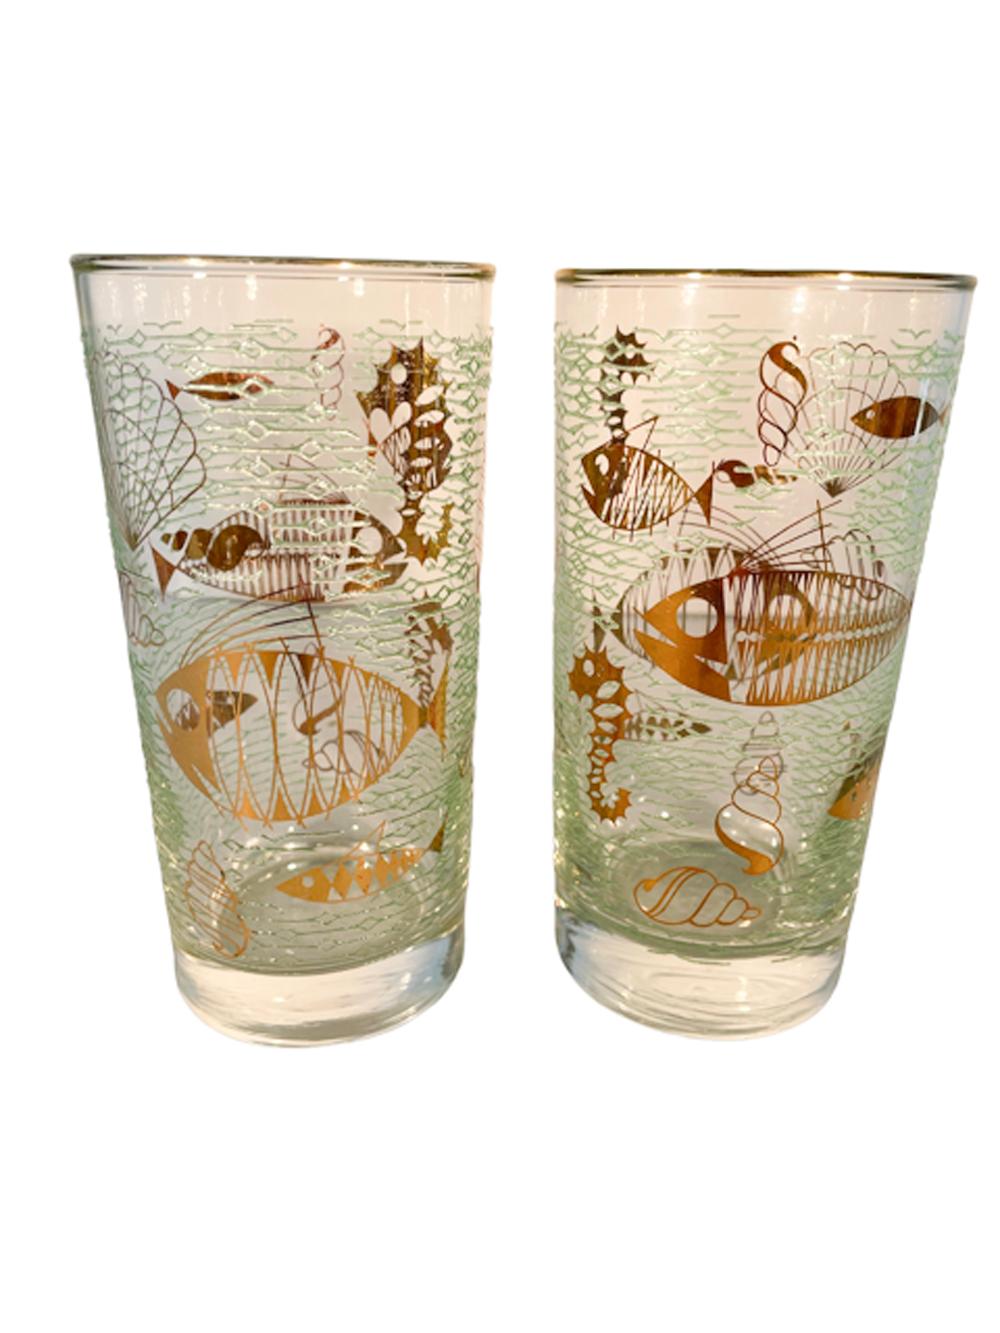 Midcentury Libbey Glass Highball Glasses in the Marine Life Pattern In Good Condition For Sale In Nantucket, MA